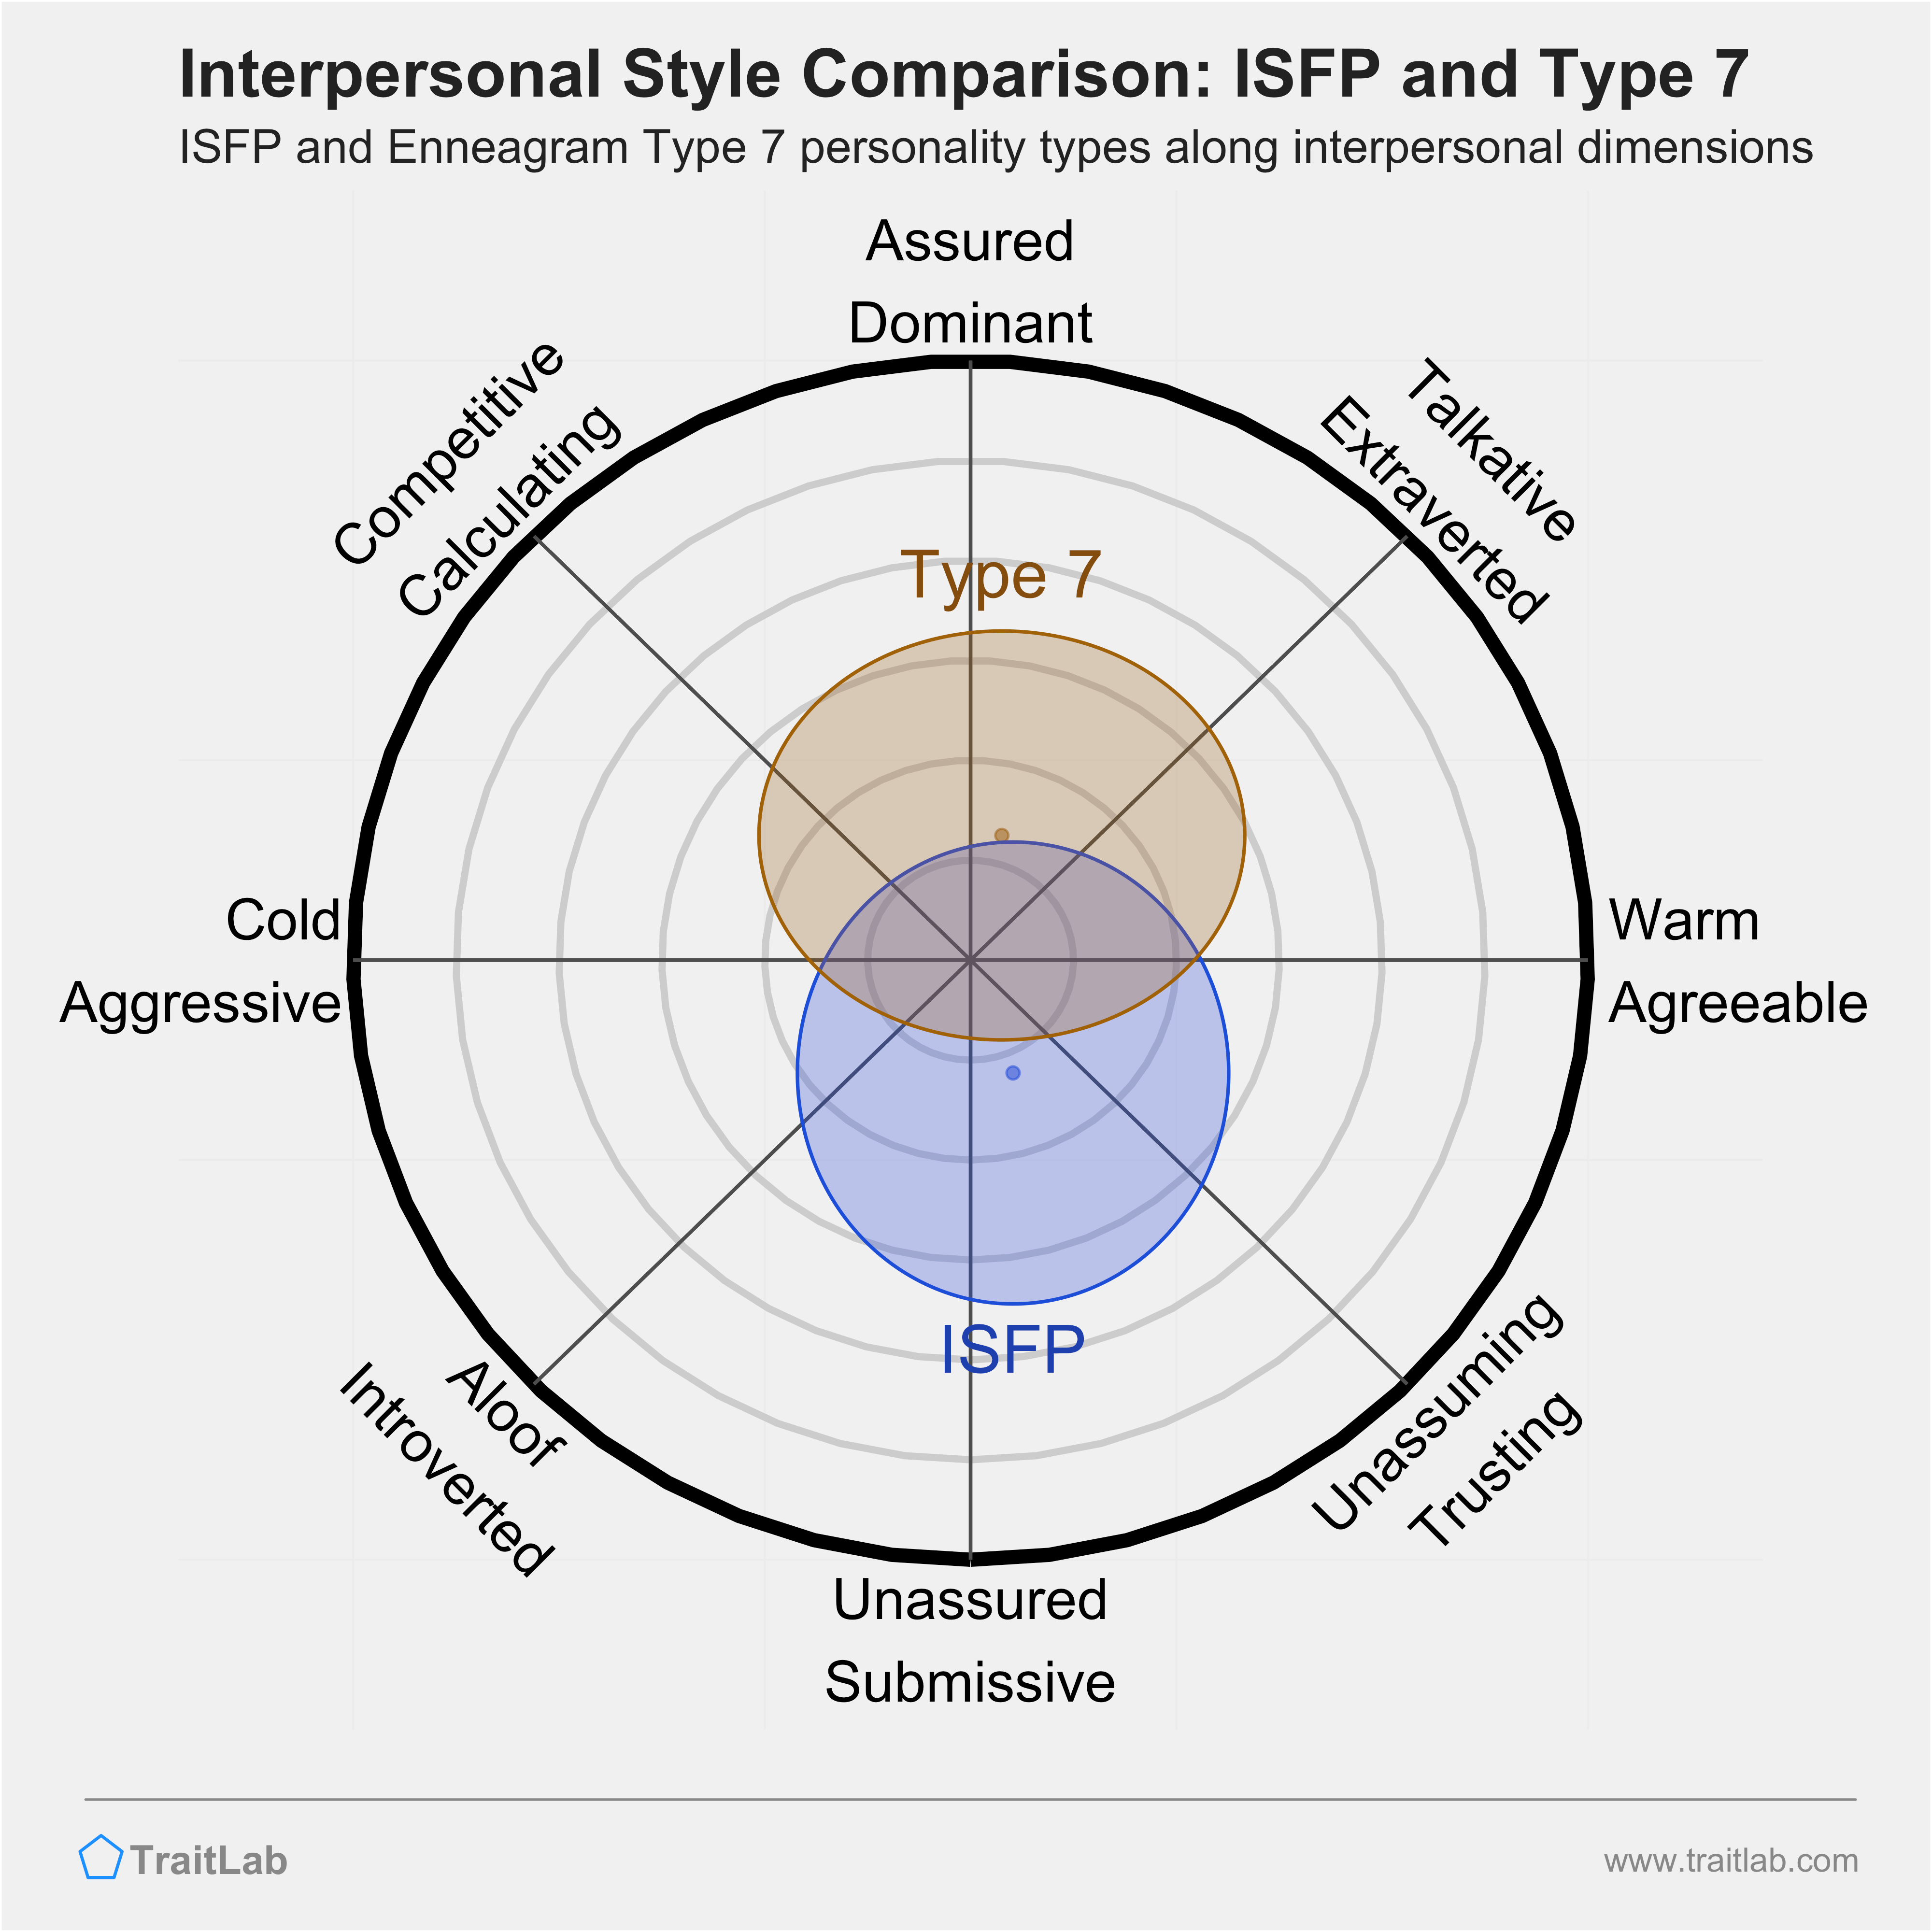 Enneagram ISFP and Type 7 comparison across interpersonal dimensions